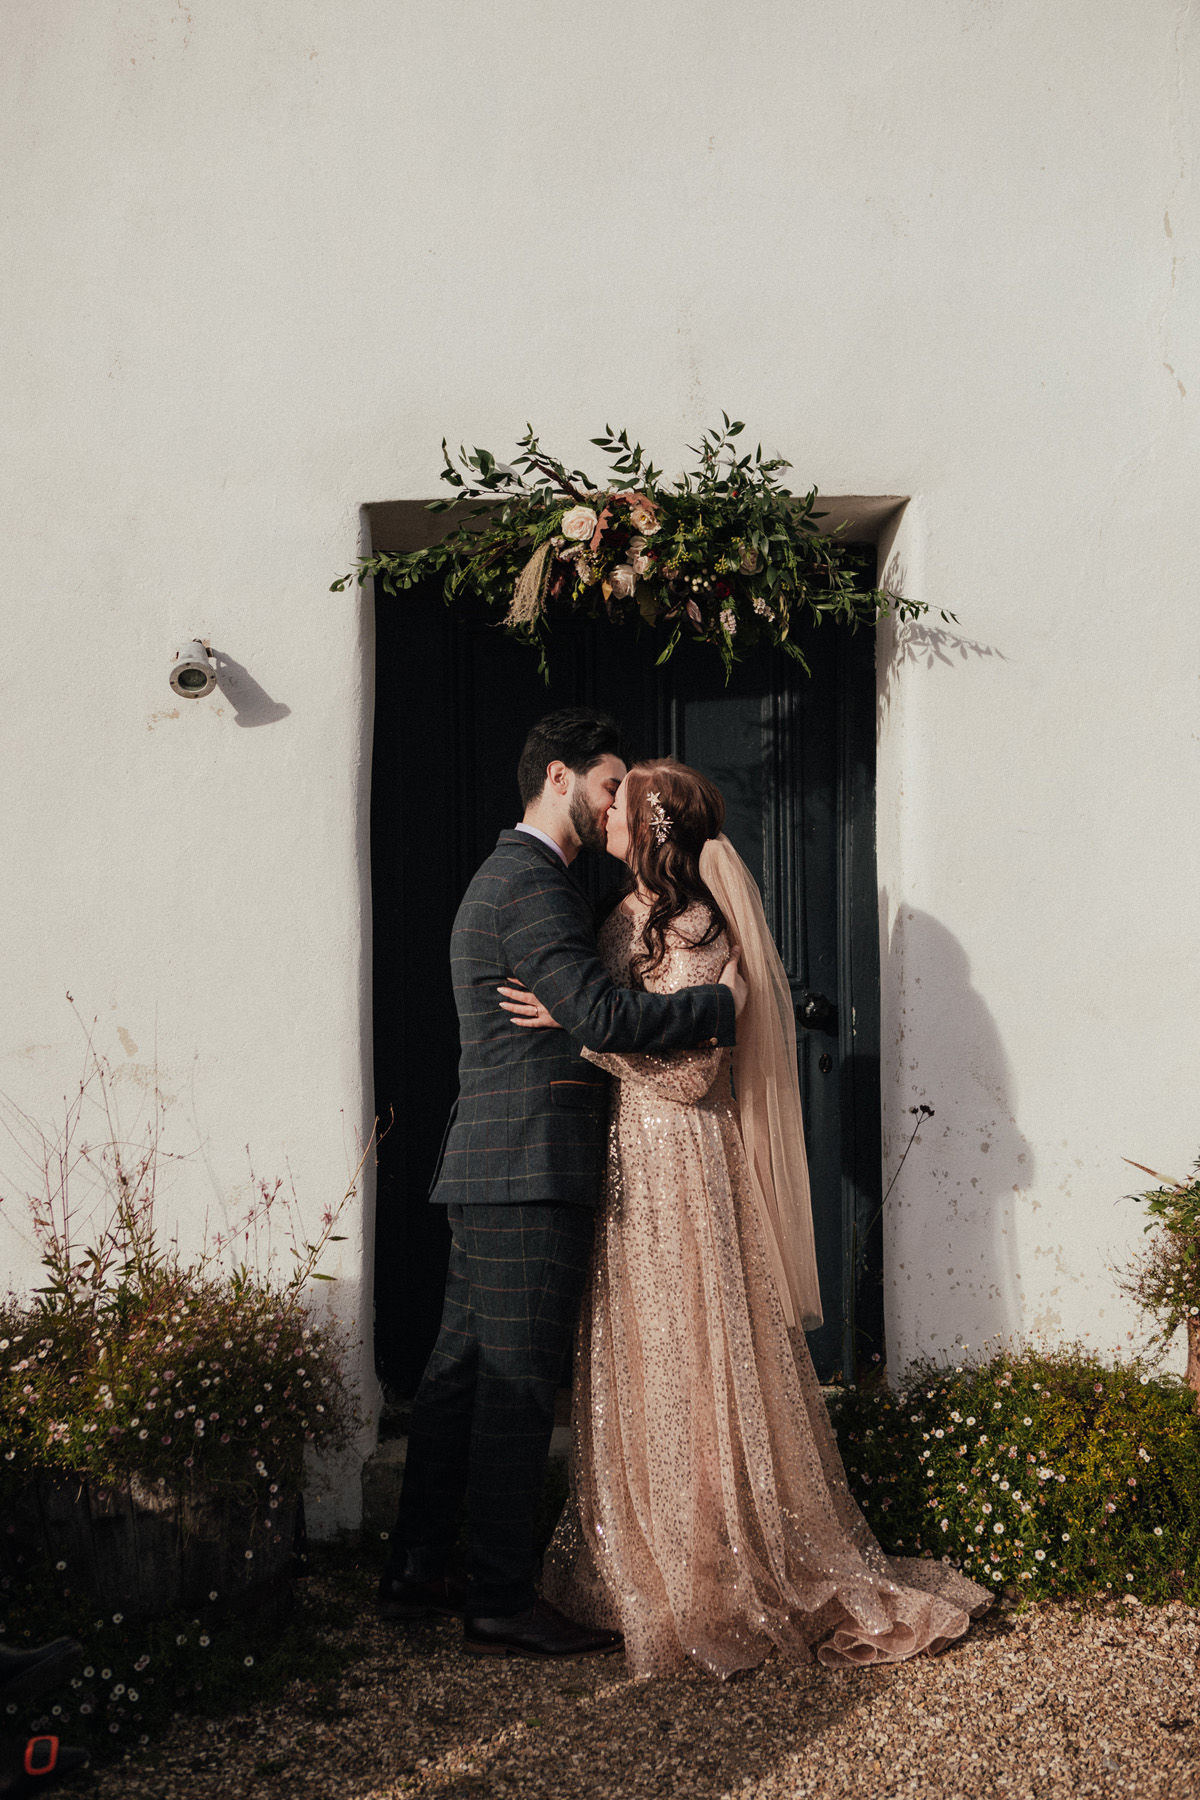 A Sequin Wedding Dress From Ukraine for a Romantic Winter Wedding at River Cottage | Love My Dress®